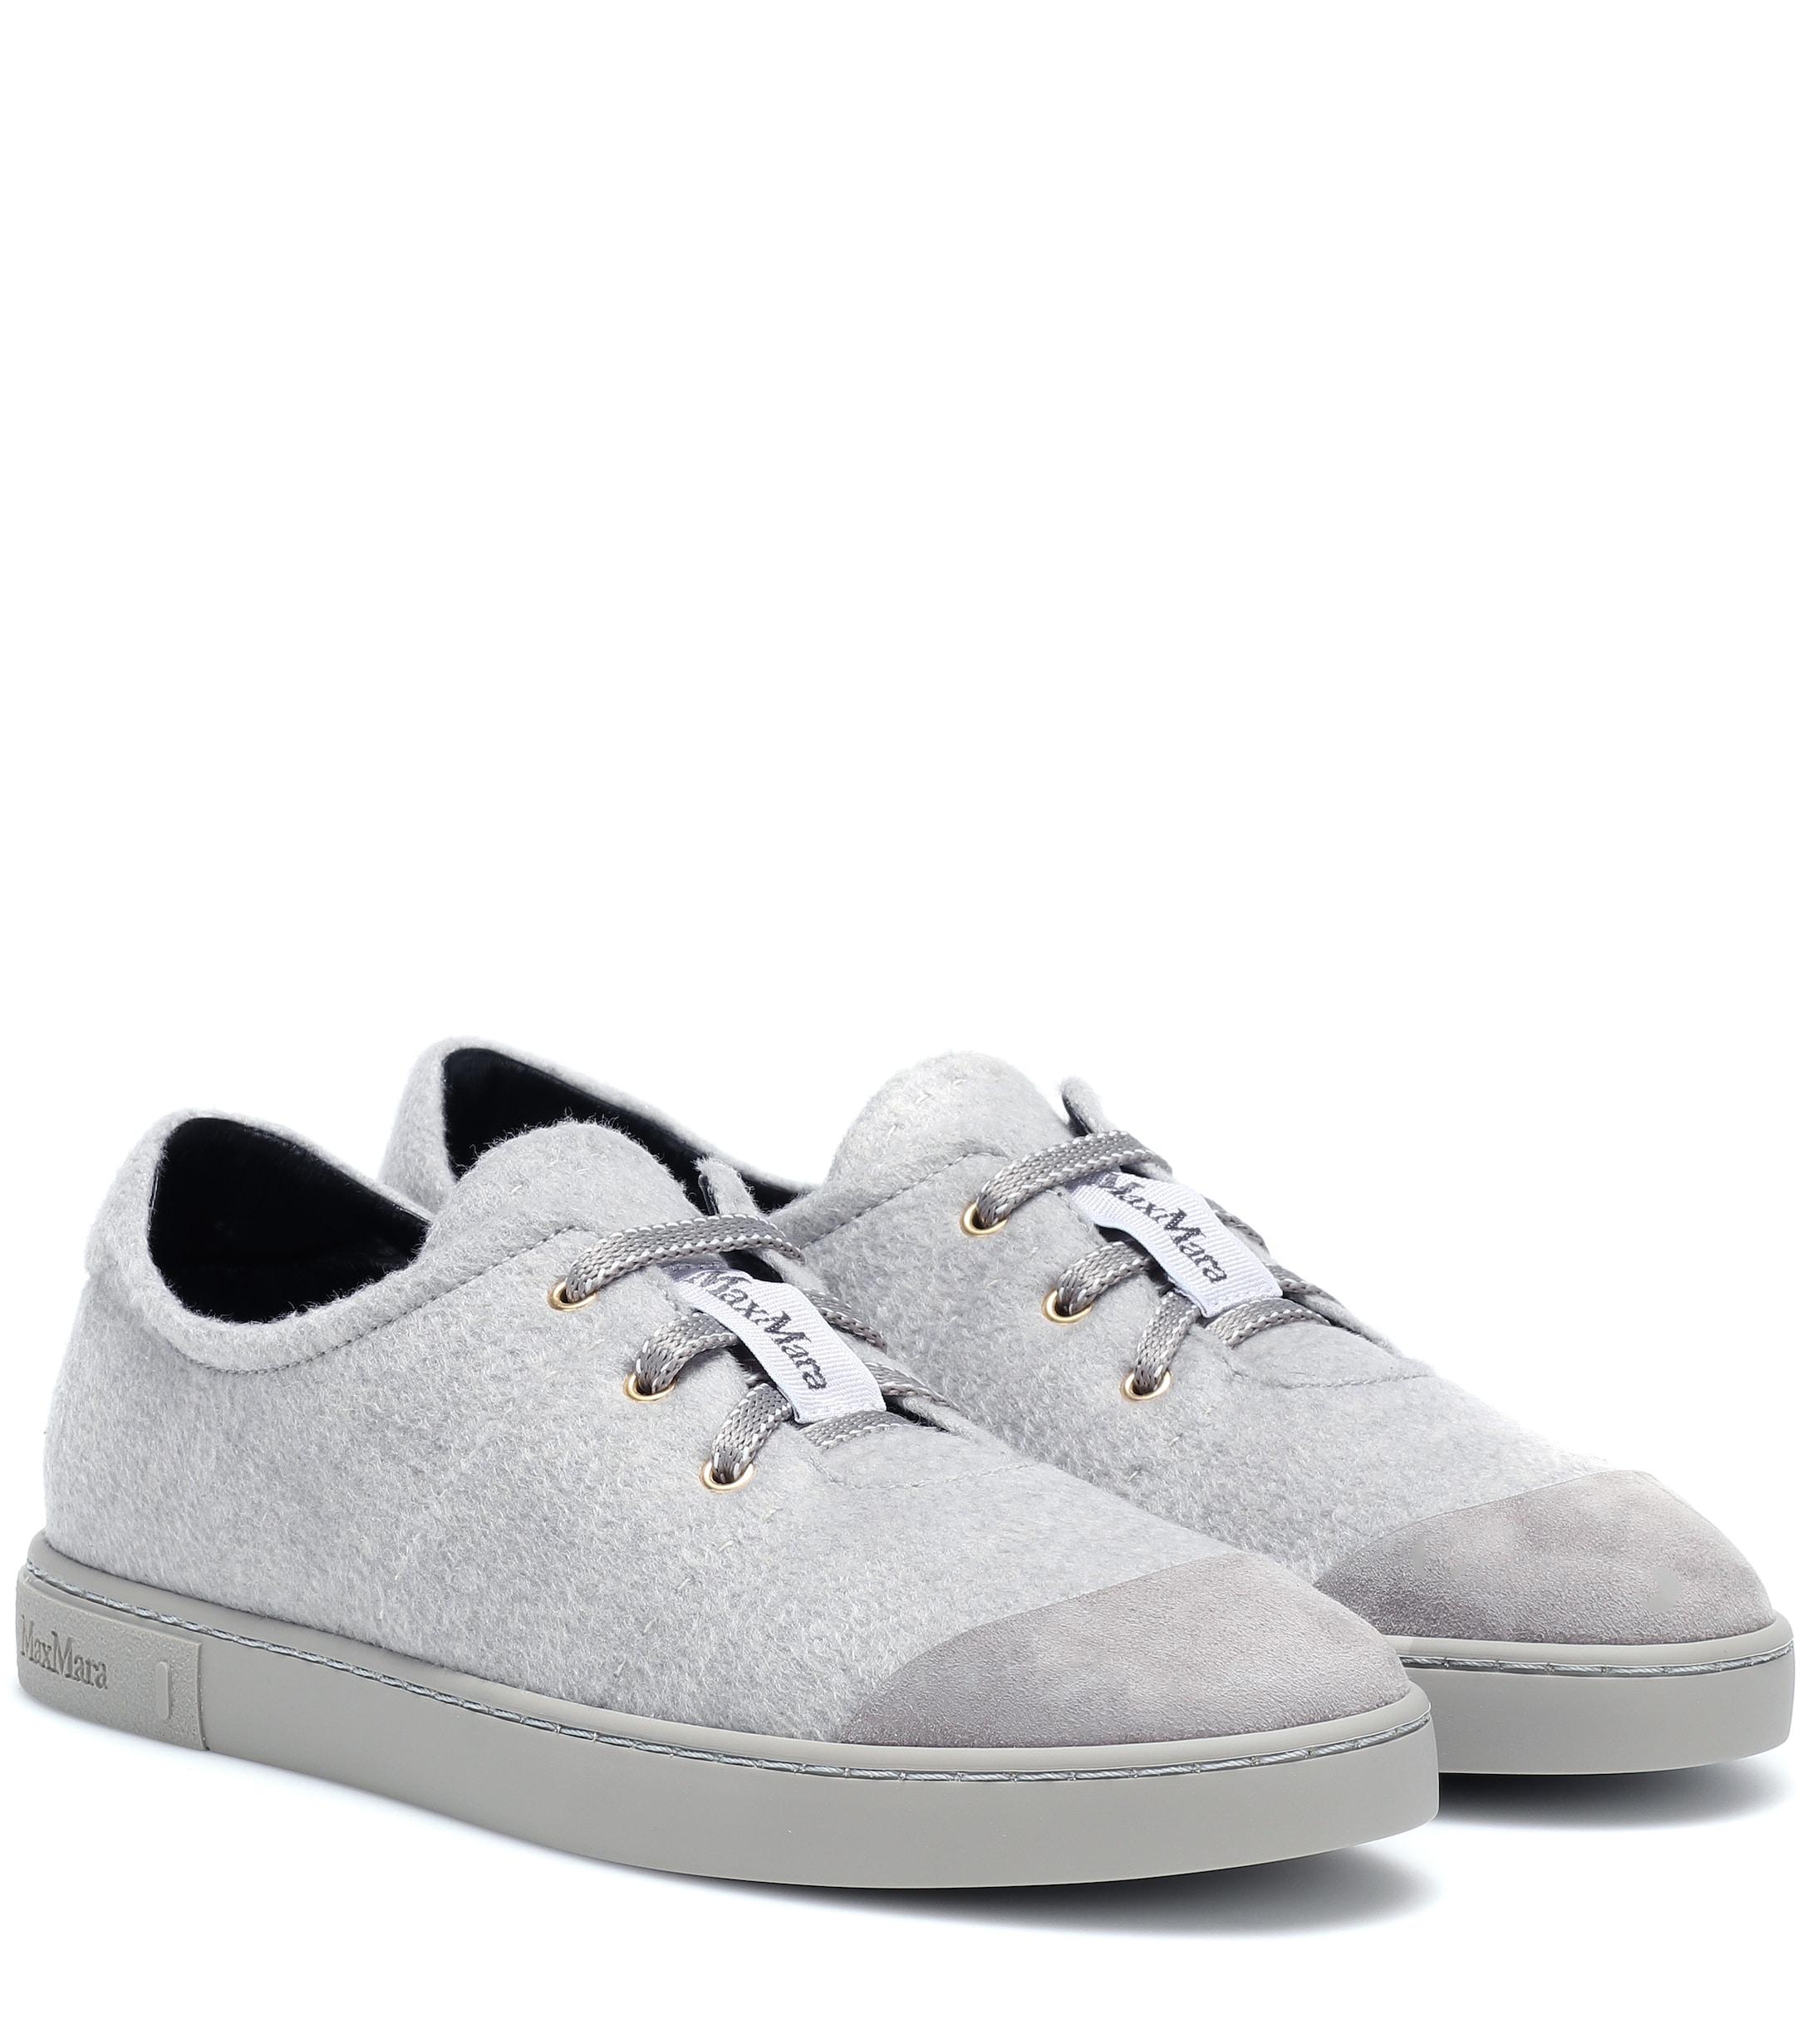 Max Mara Phil Cashmere Sneakers in Grey (Gray) - Lyst